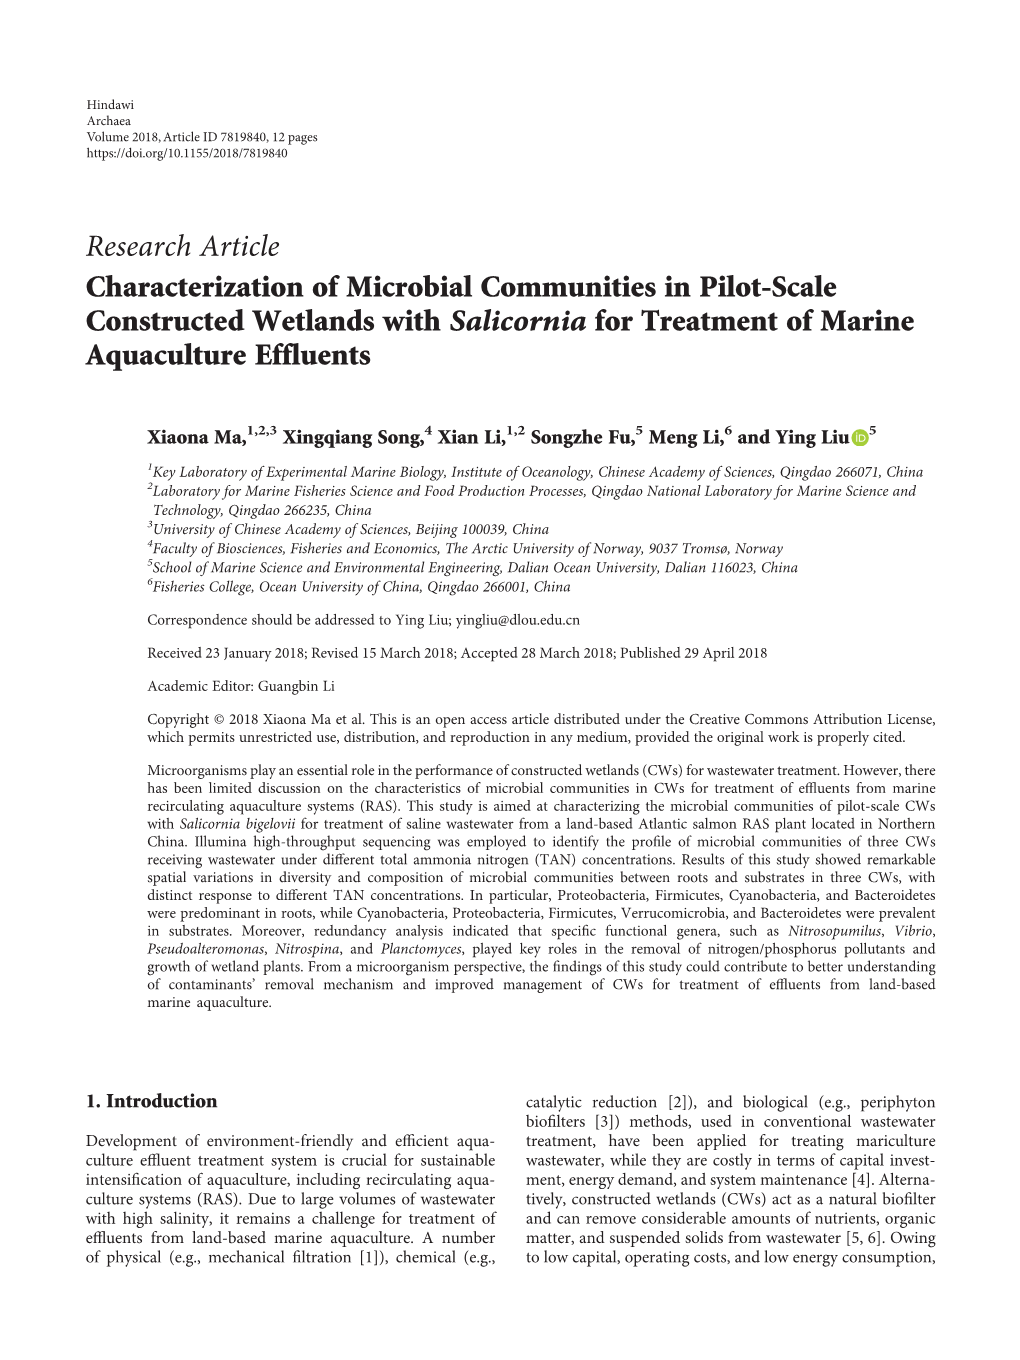 Research Article Characterization of Microbial Communities in Pilot-Scale Constructed Wetlands with Salicornia for Treatment of Marine Aquaculture Effluents